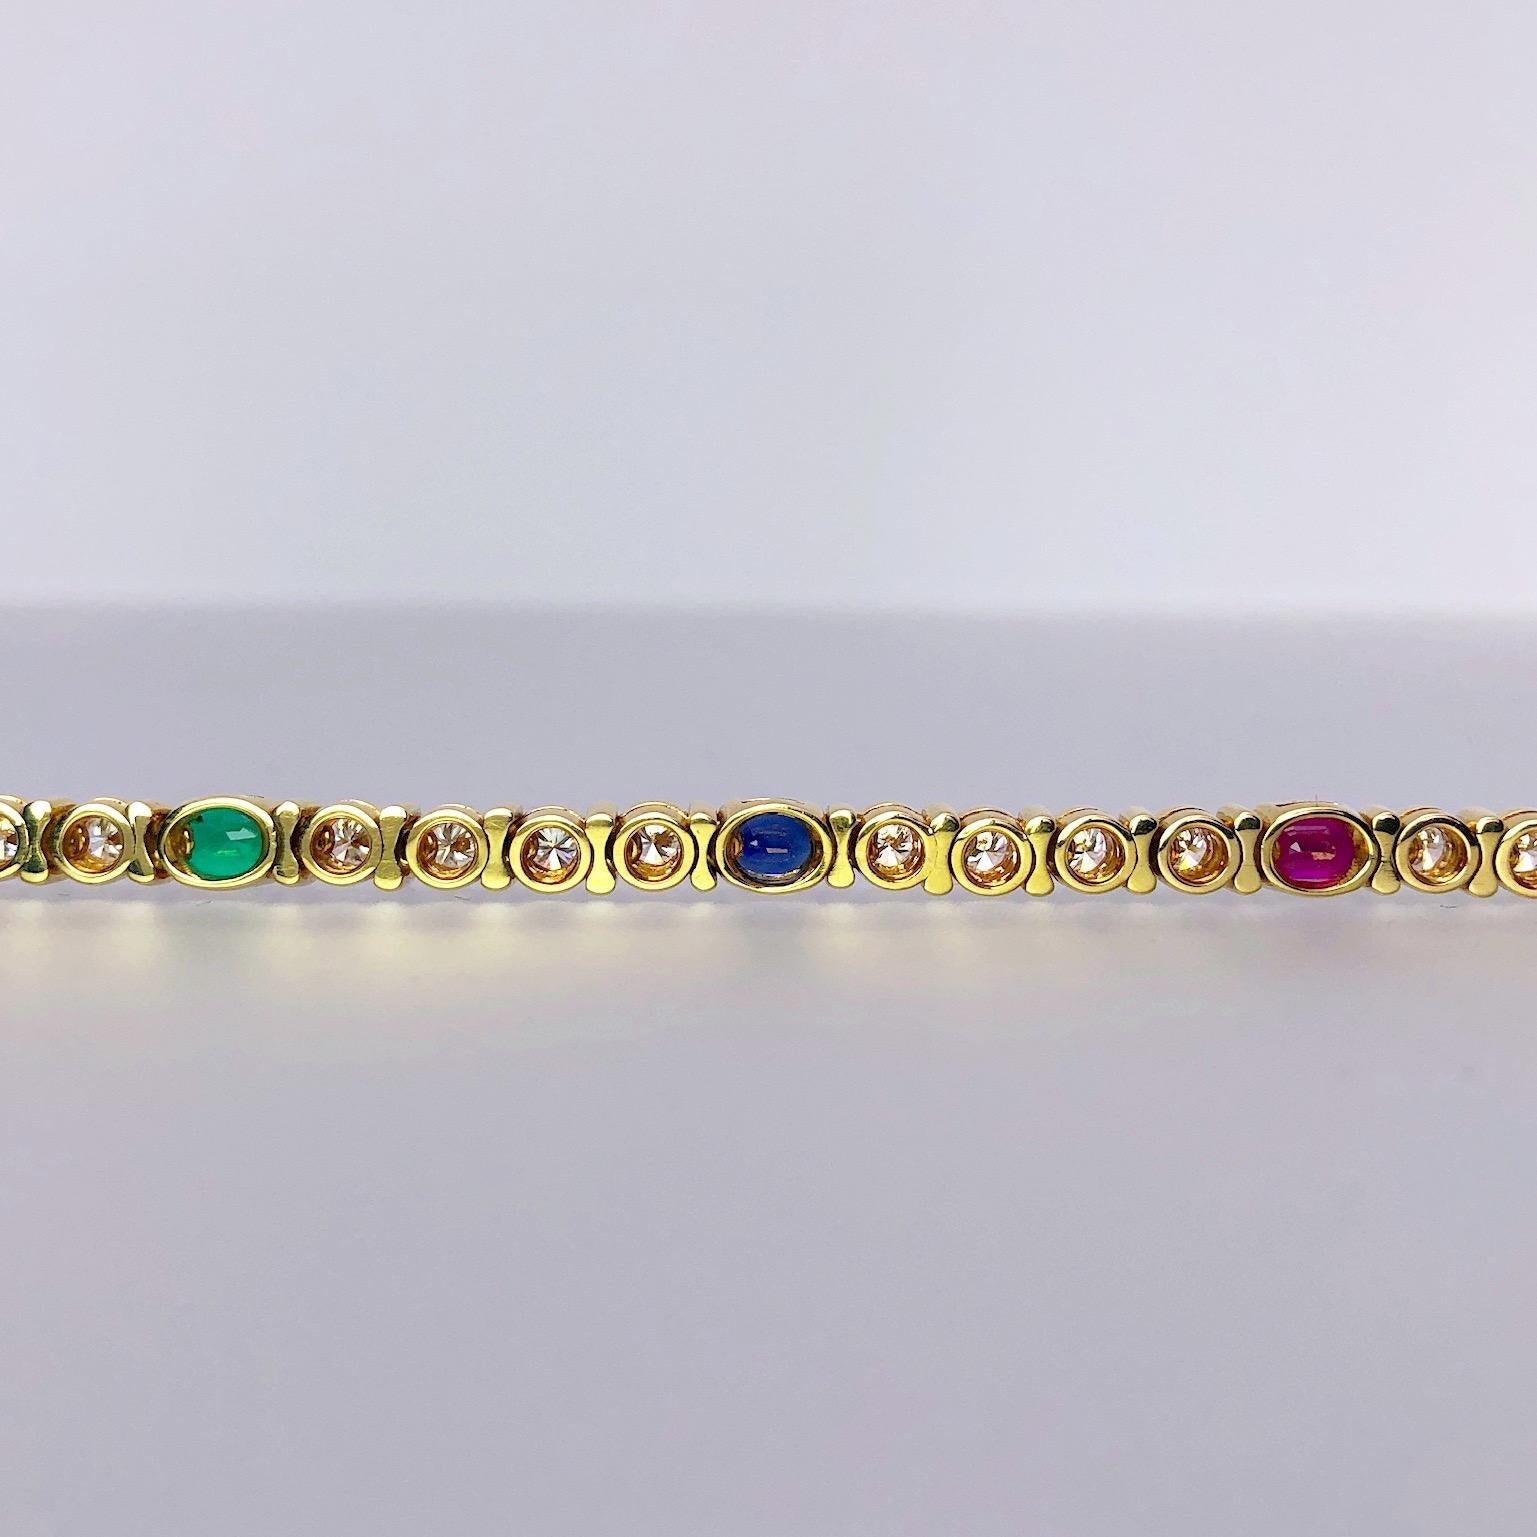 Barzizza 18KT Yellow Gold Bracelet with Diamonds, Rubies, Emeralds and Sapphires For Sale 2